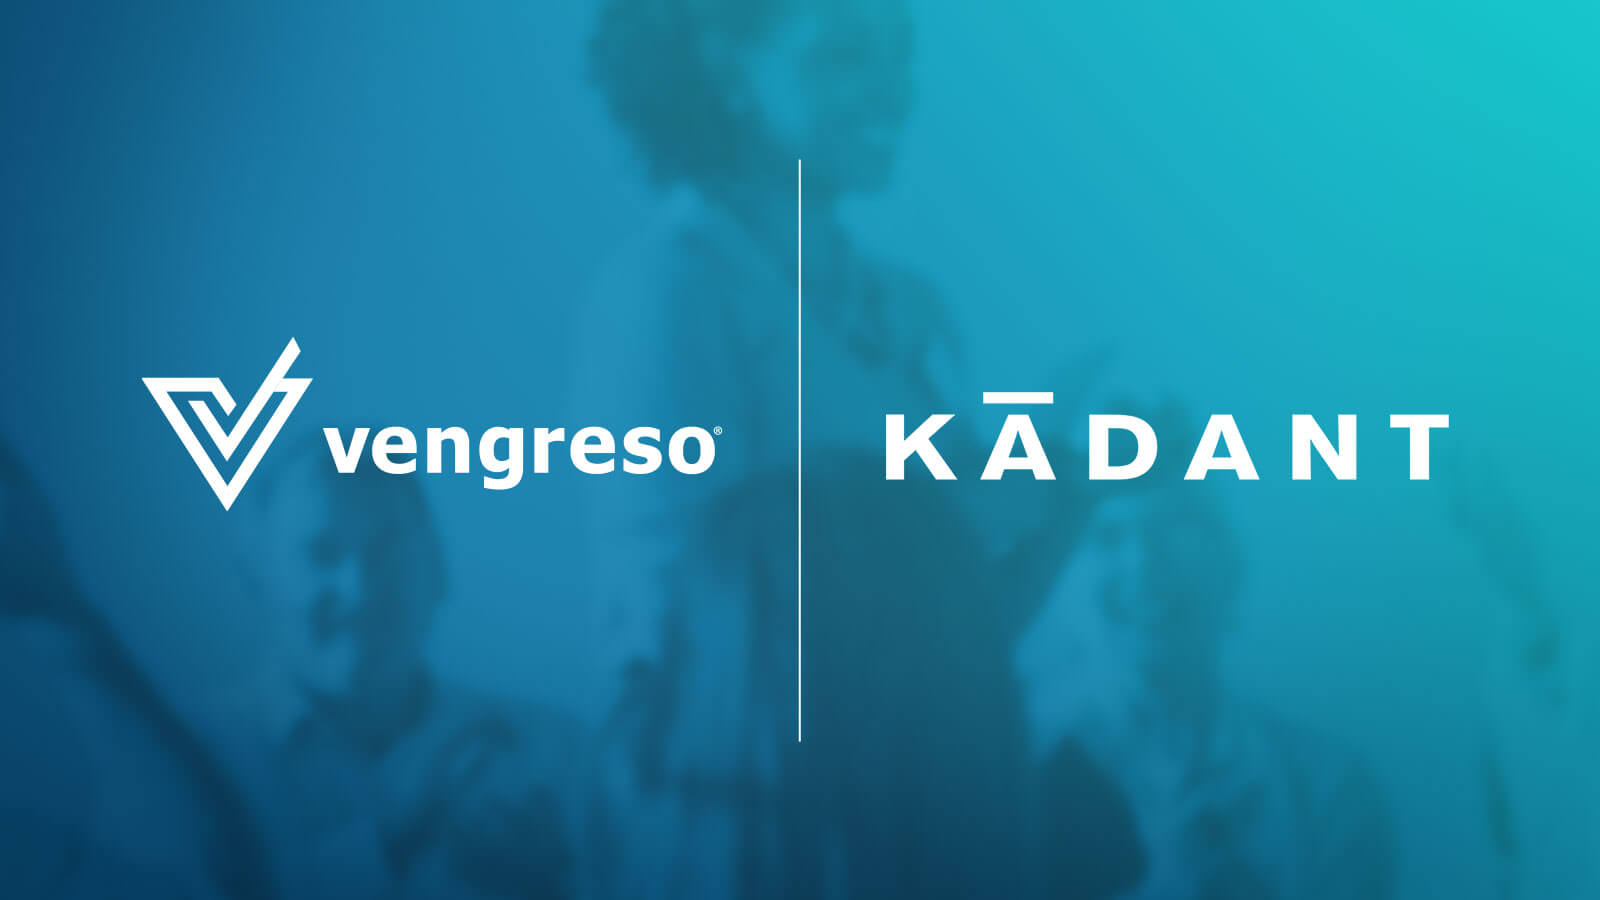 Vengreso and Kadant logos on a blue background showcasing LinkedIn profile makeovers and selling with LinkedIn training for teams.